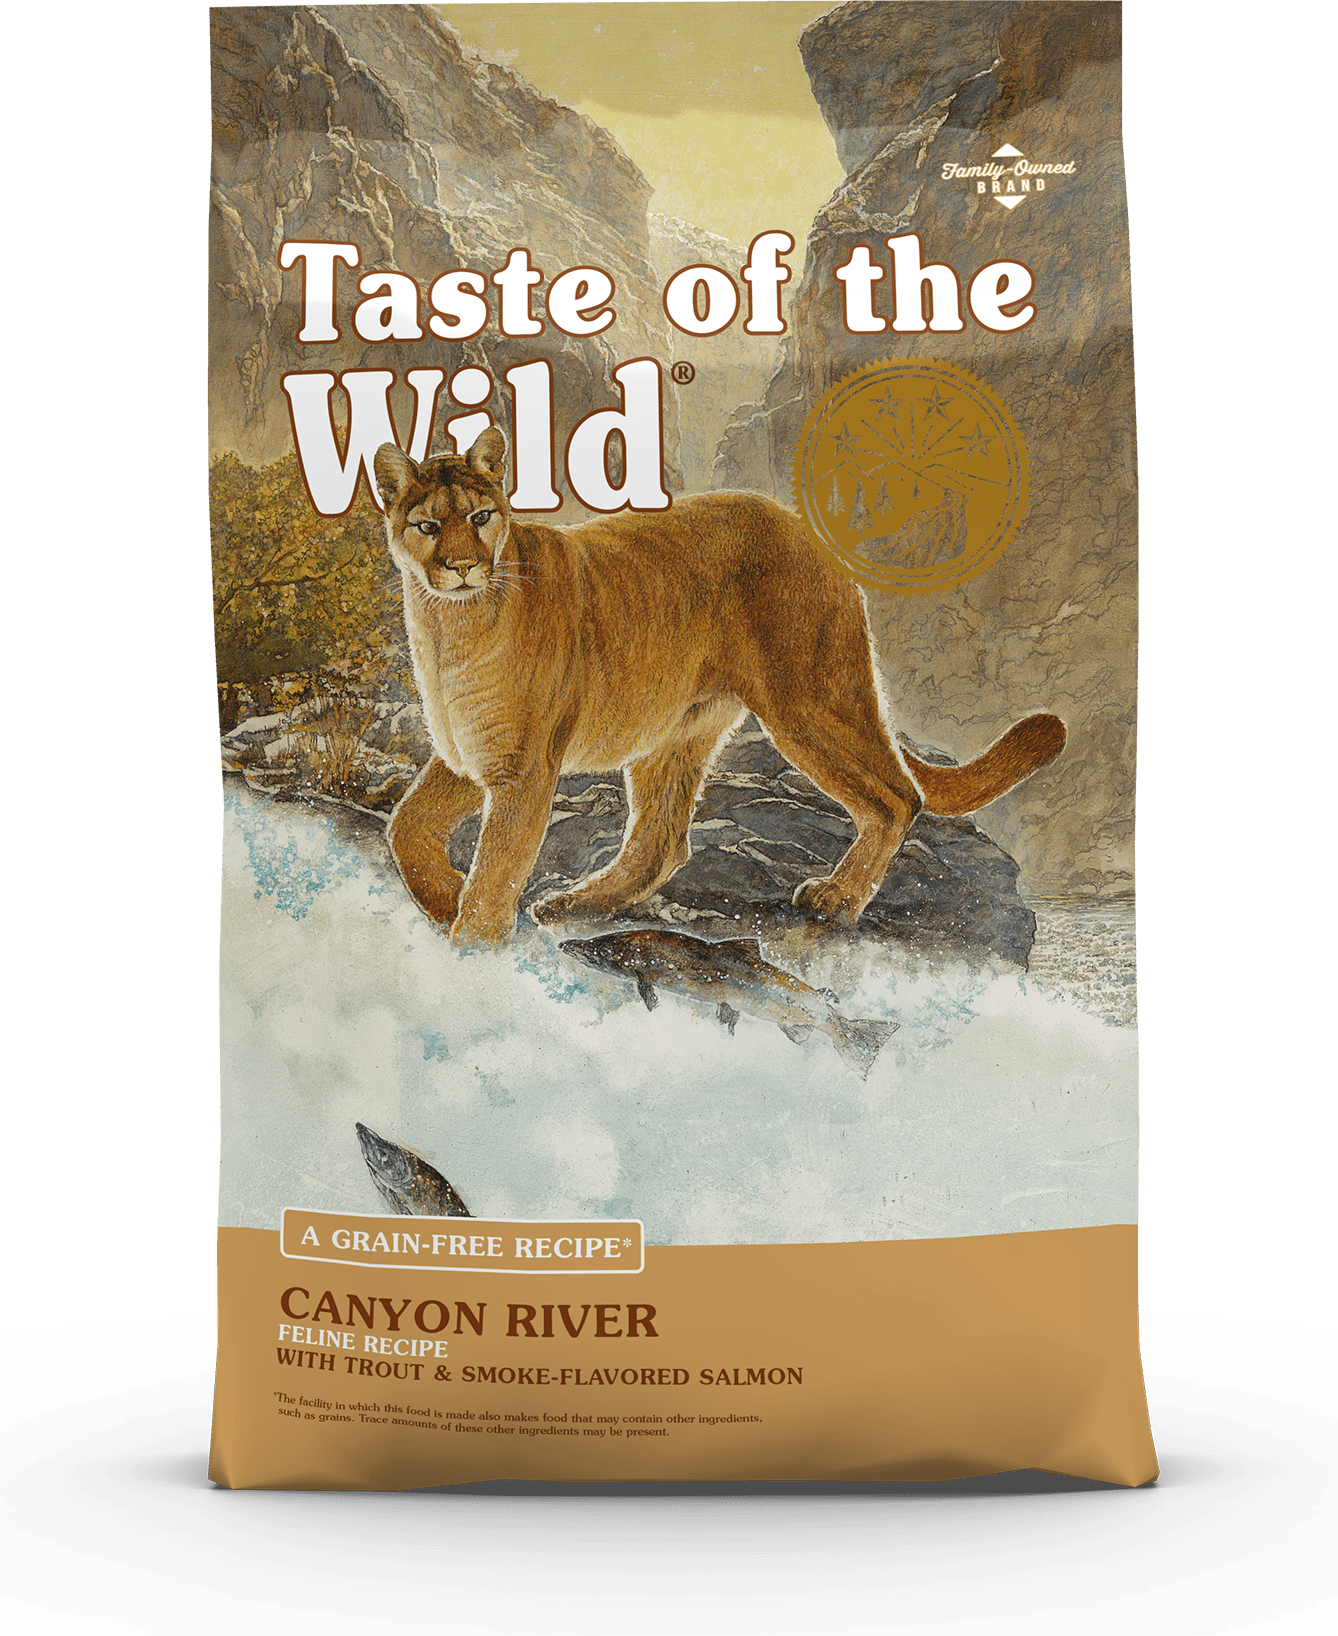 Taste Of The Wild Canyon River Recipe With Trout & Smoke-Flavored Salmon